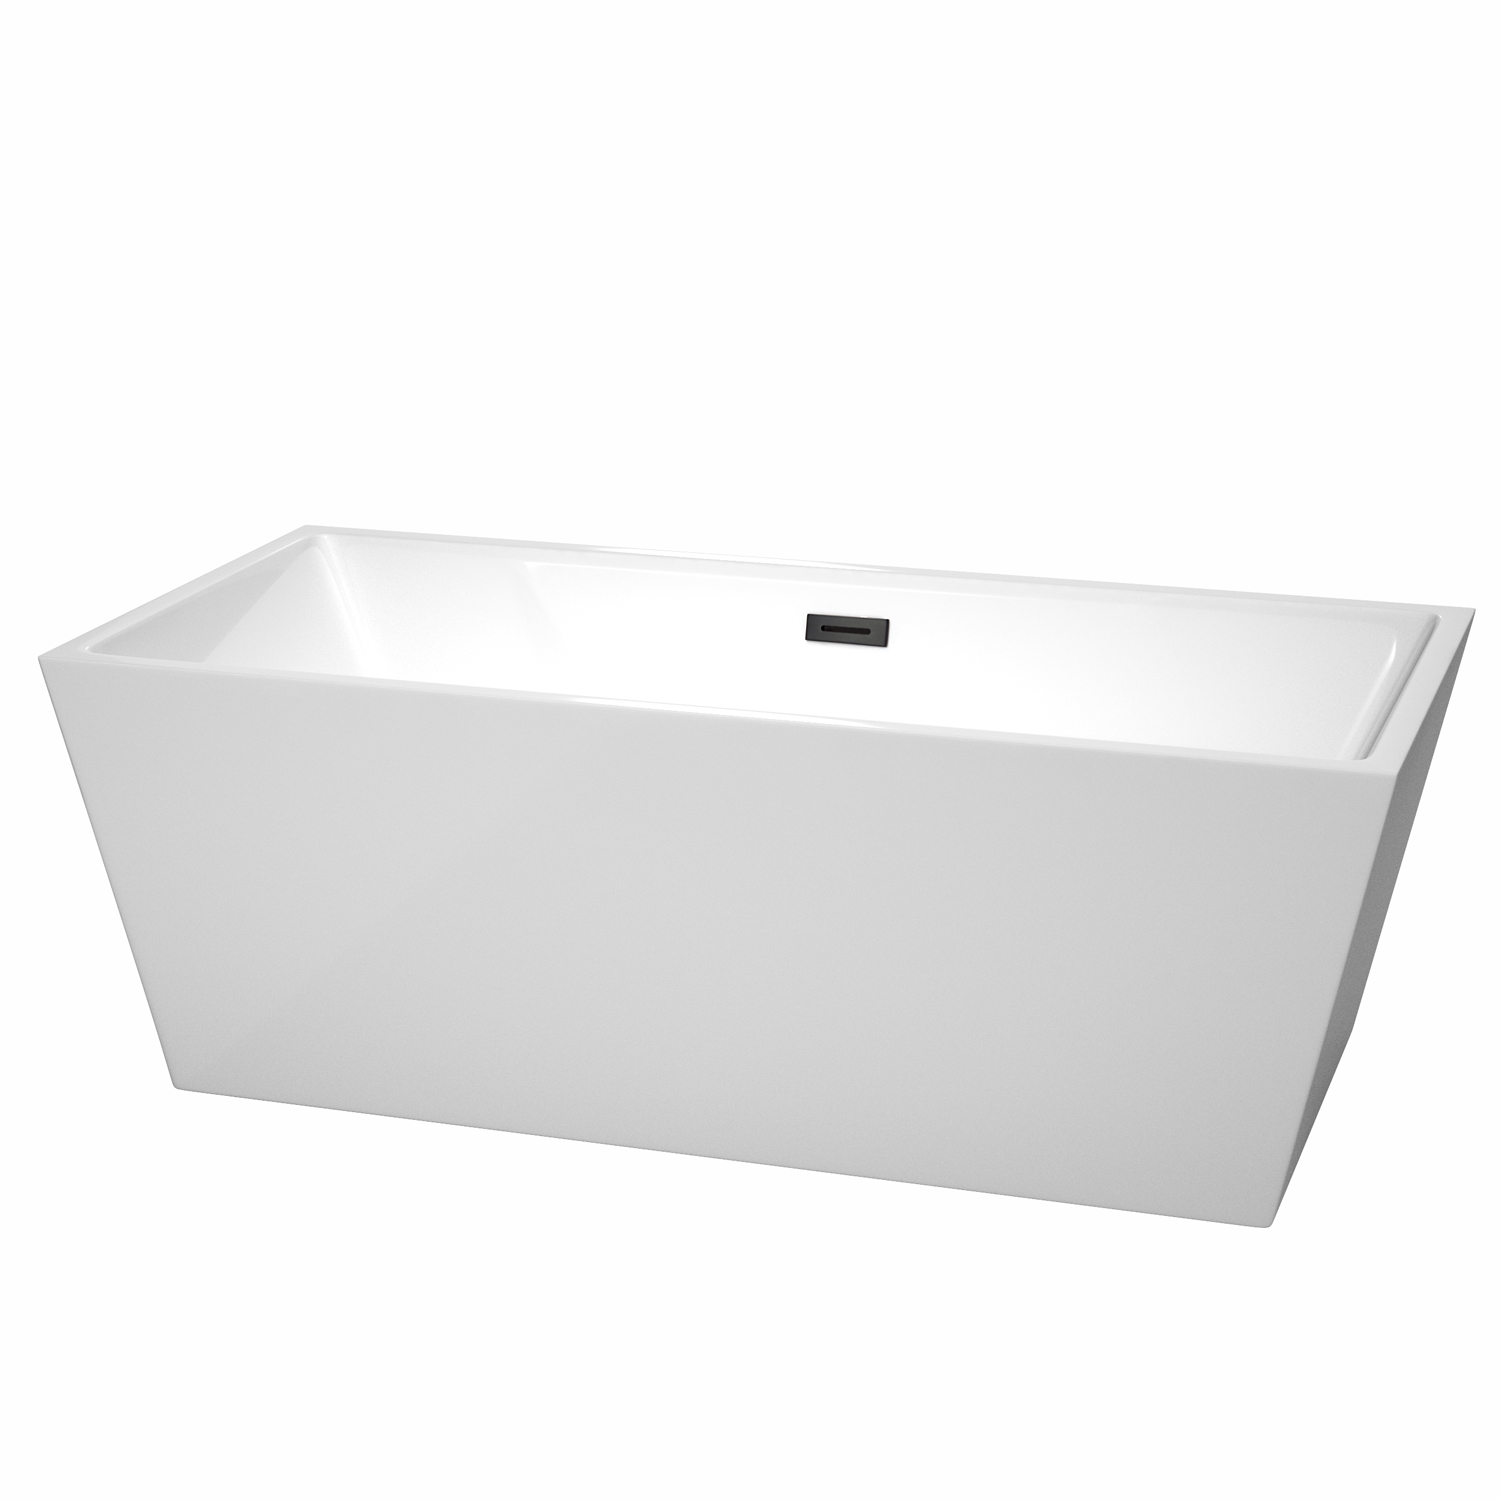 67" Freestanding Bathtub in White with Matte Black Popo-up Drain and Overflow Trim